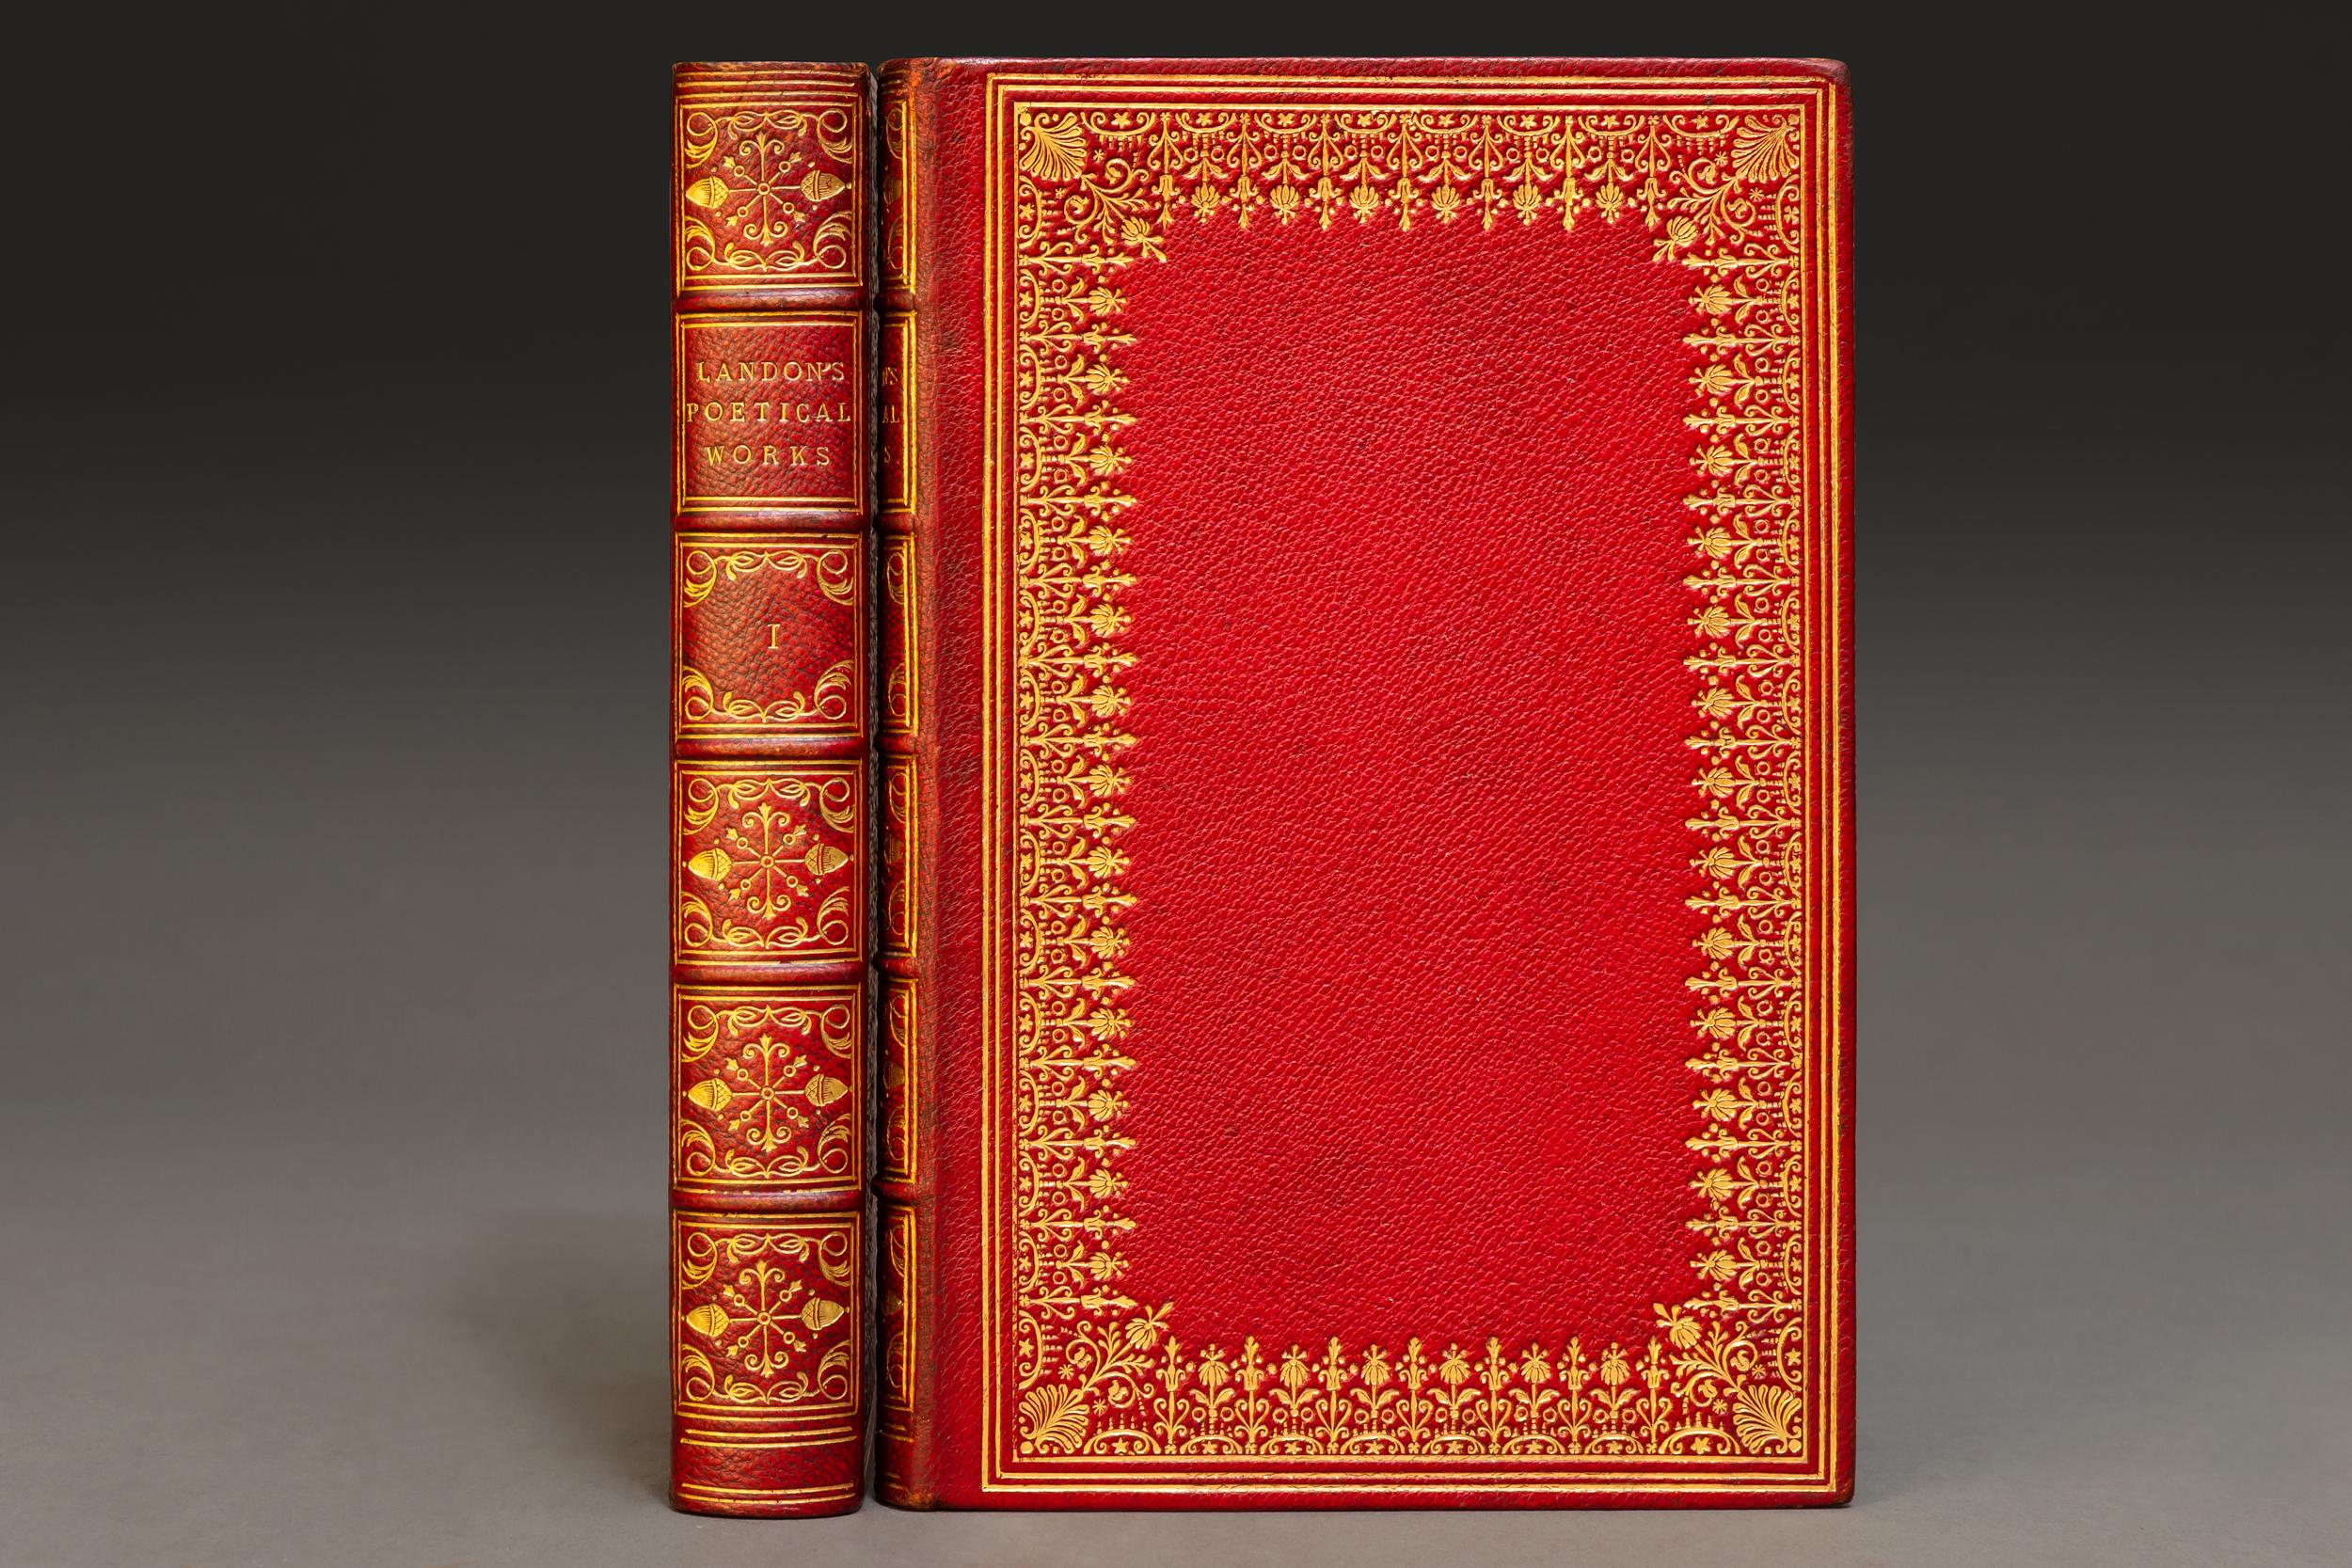 2 Volumes. Letitia Elizabeth Landon. The Poetical Works. With memoir. Printed by Spottiswoode & Co. Bound in full red morocco. Ornate gilt on spines & covers, inner dentelles, raised bands, all edges gilt. 
Published: London: Longman, Green, &